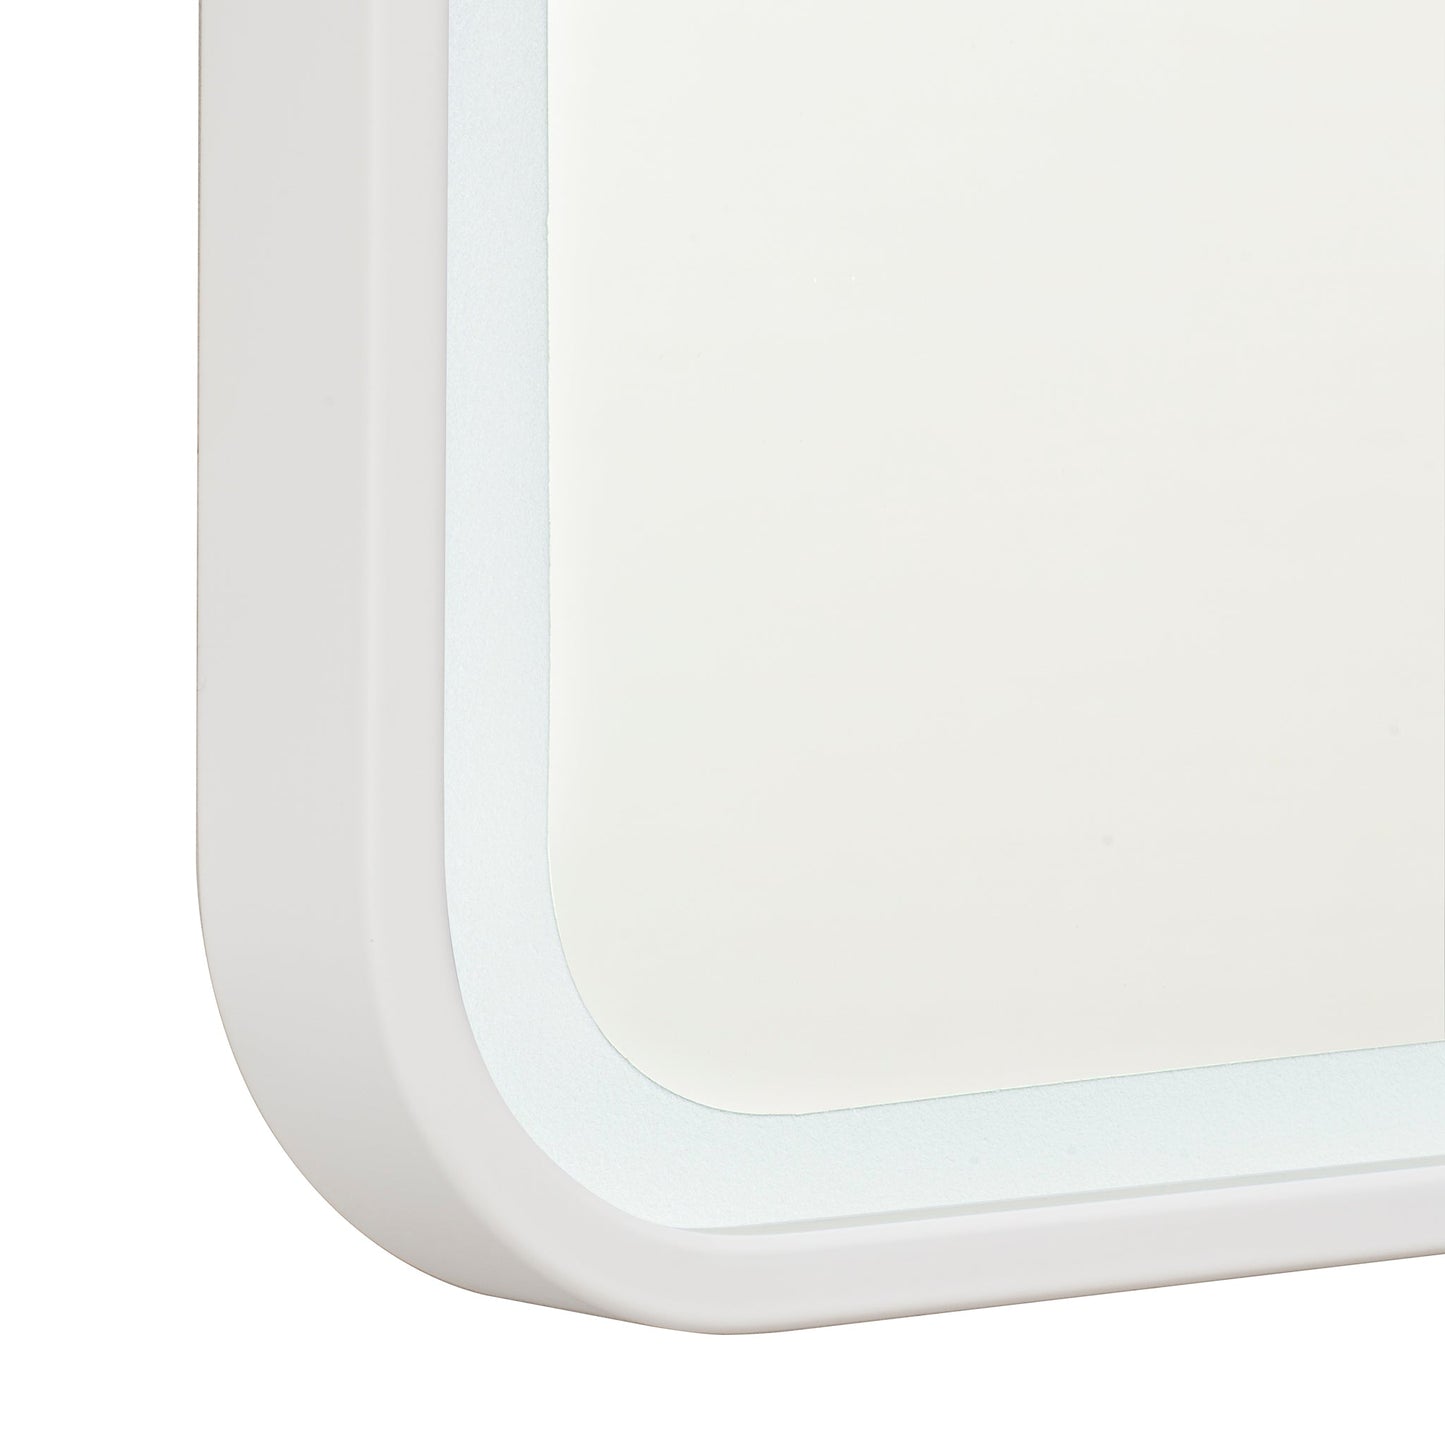 Arco Arch 850mm x 1000mm Frontlit LED Framed Mirror in Matte White with Demister